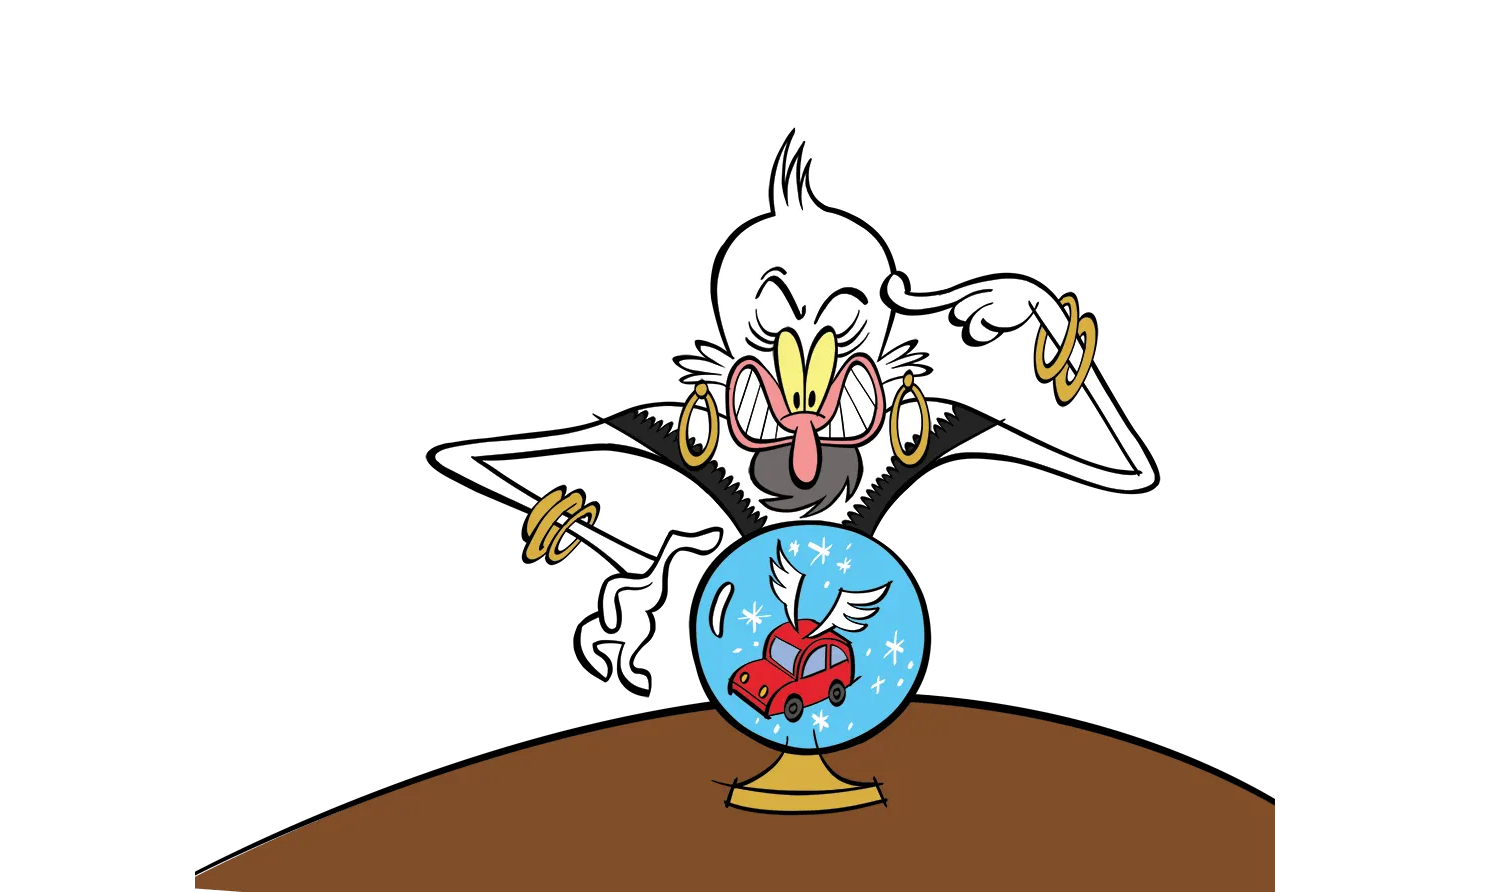 Illustrated character looking in to a crystal ball